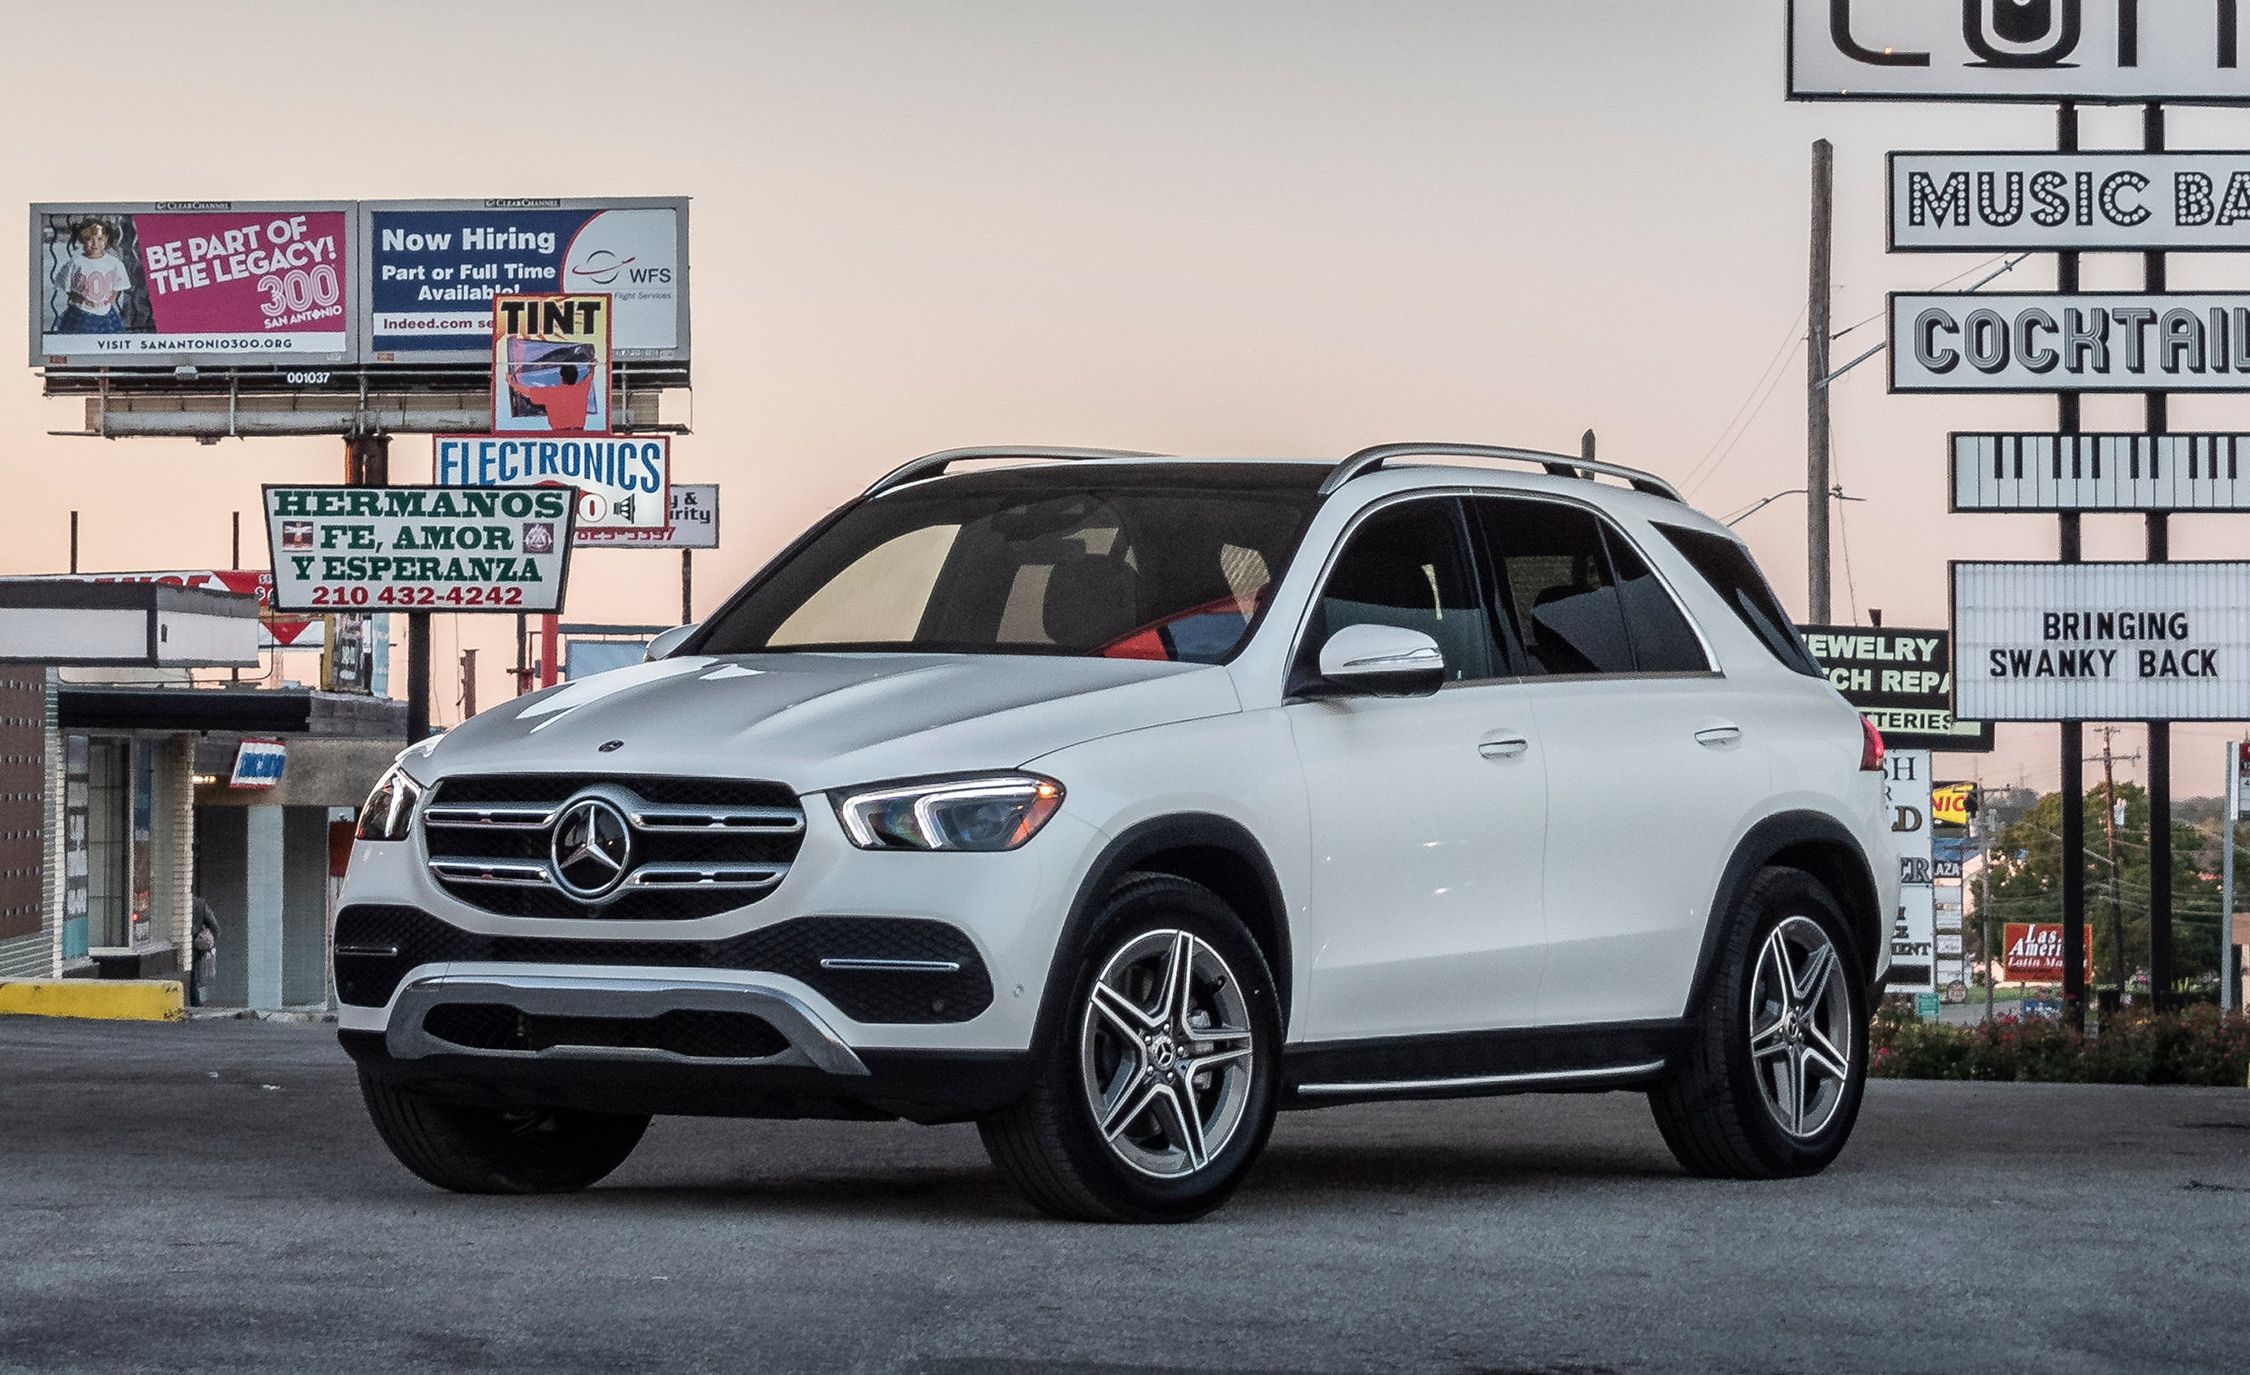 2020 Mercedes Benz Gle Class Pricing Announced Four Cylinder